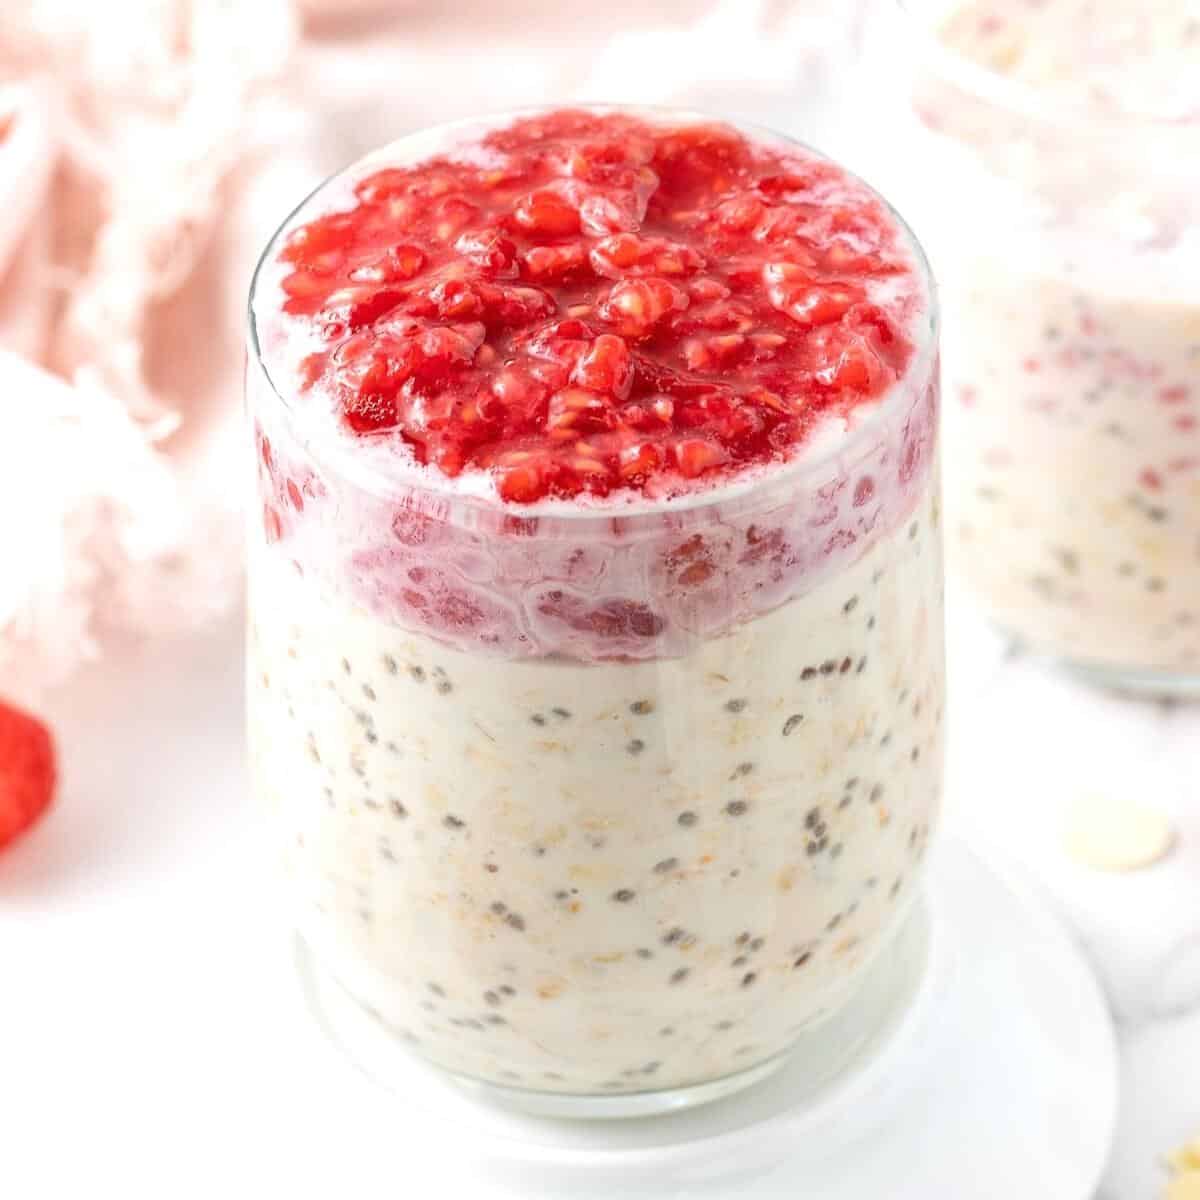 Glass jar of overnight oats, topped with crushed raspberries.